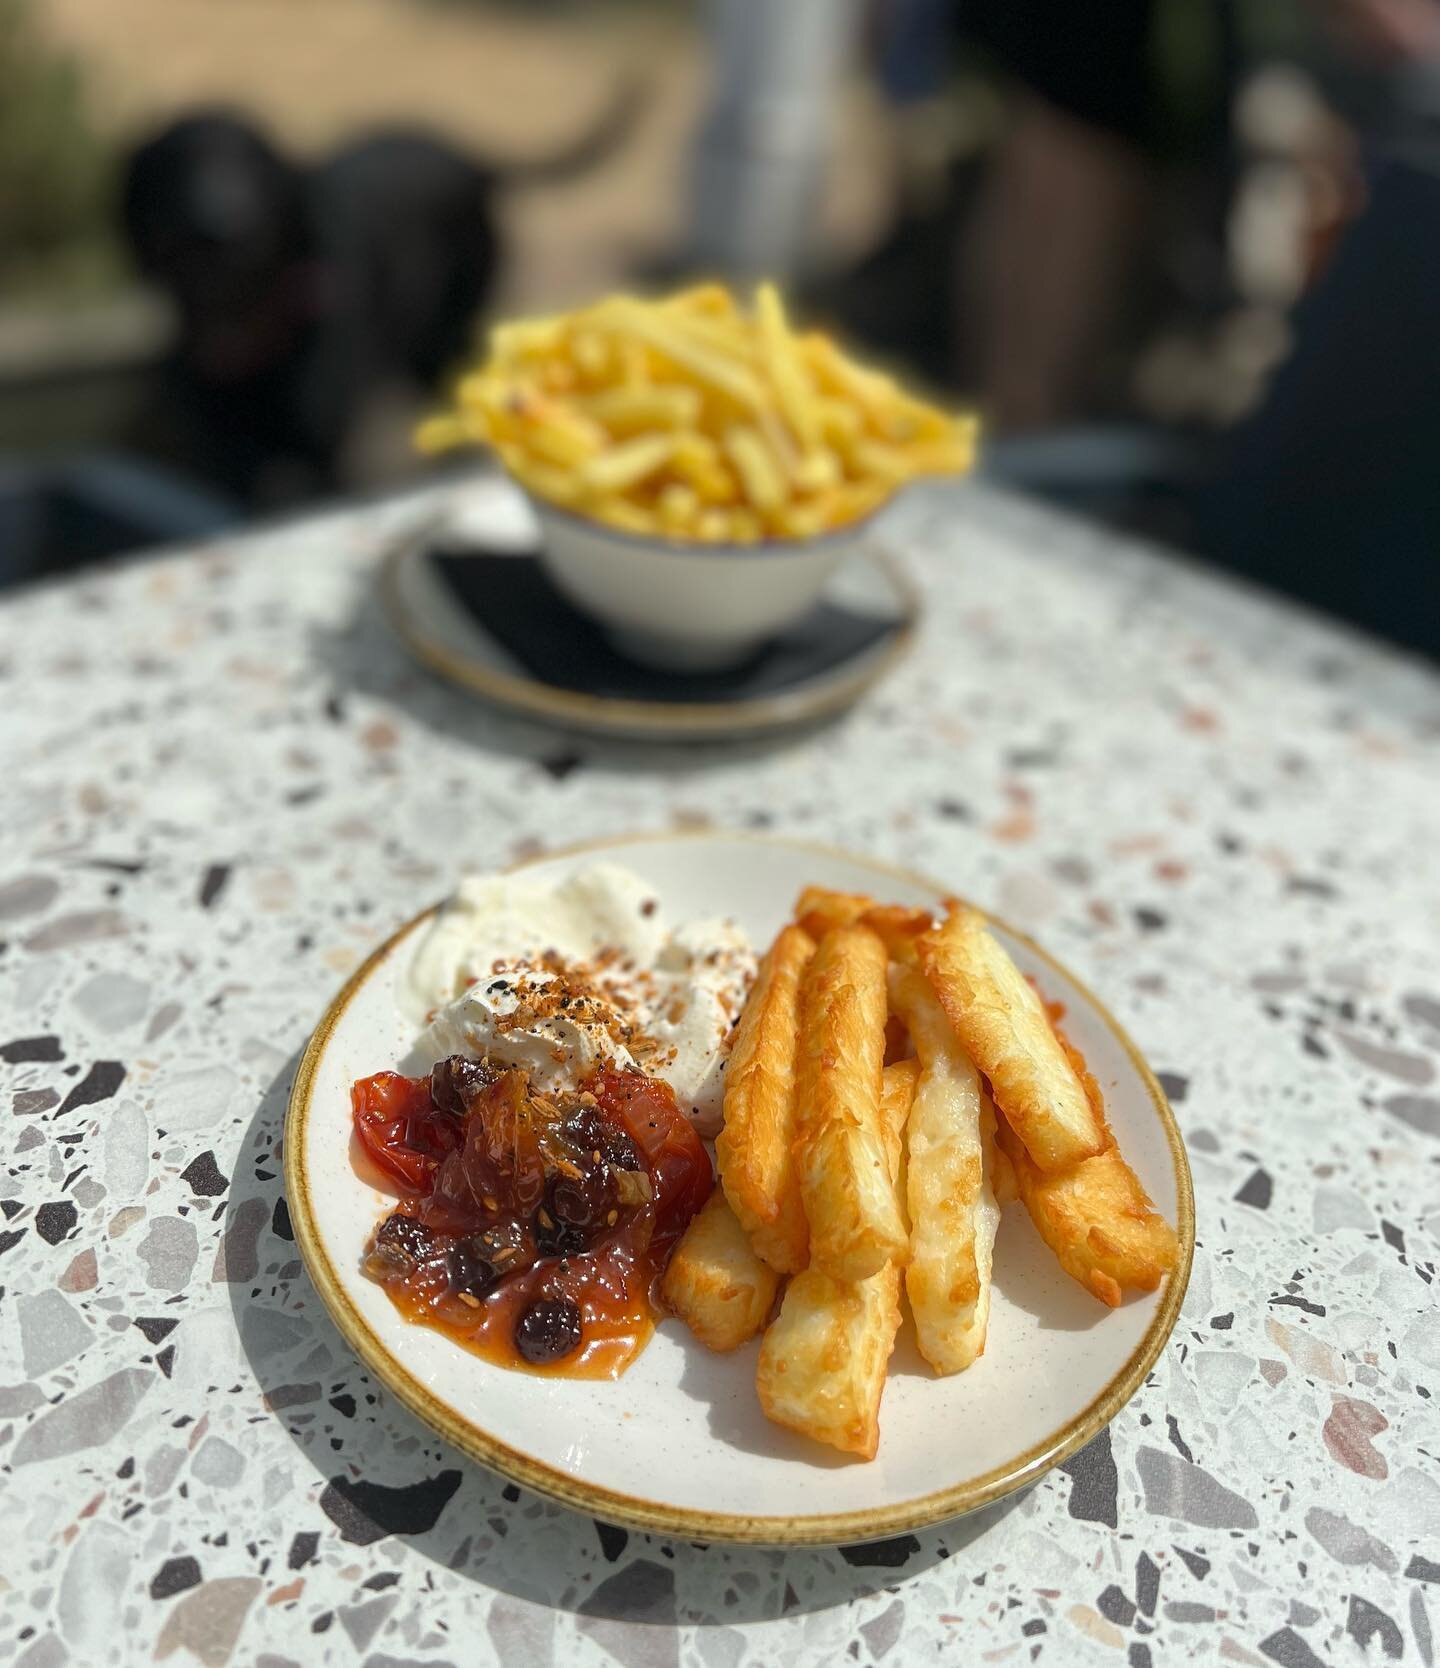 Peckish?  When you just fancy a little something&hellip;.our Crispy Halloumi with Greek yoghurt, dukkah, cherry tomato and current chutney is MOREISH and these squeaky, crispy fingers of deliciousness will hit your peckish spot! 

Today we opted for 